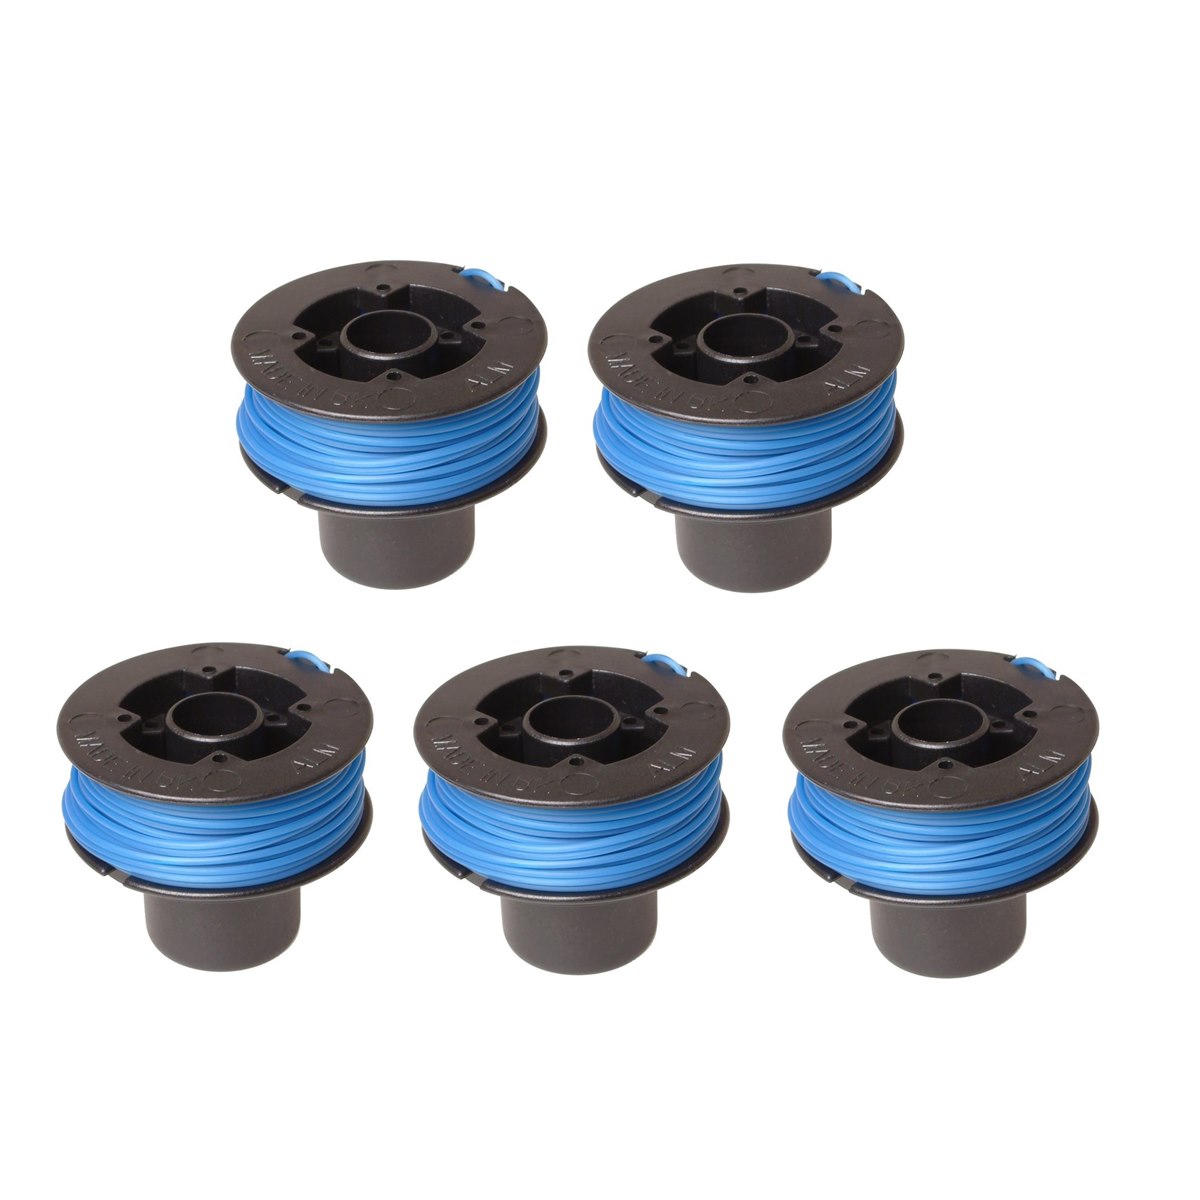 Case of 5 x ALM BD401 Spool and Line for Black and Decker Bump Feed Trimmers